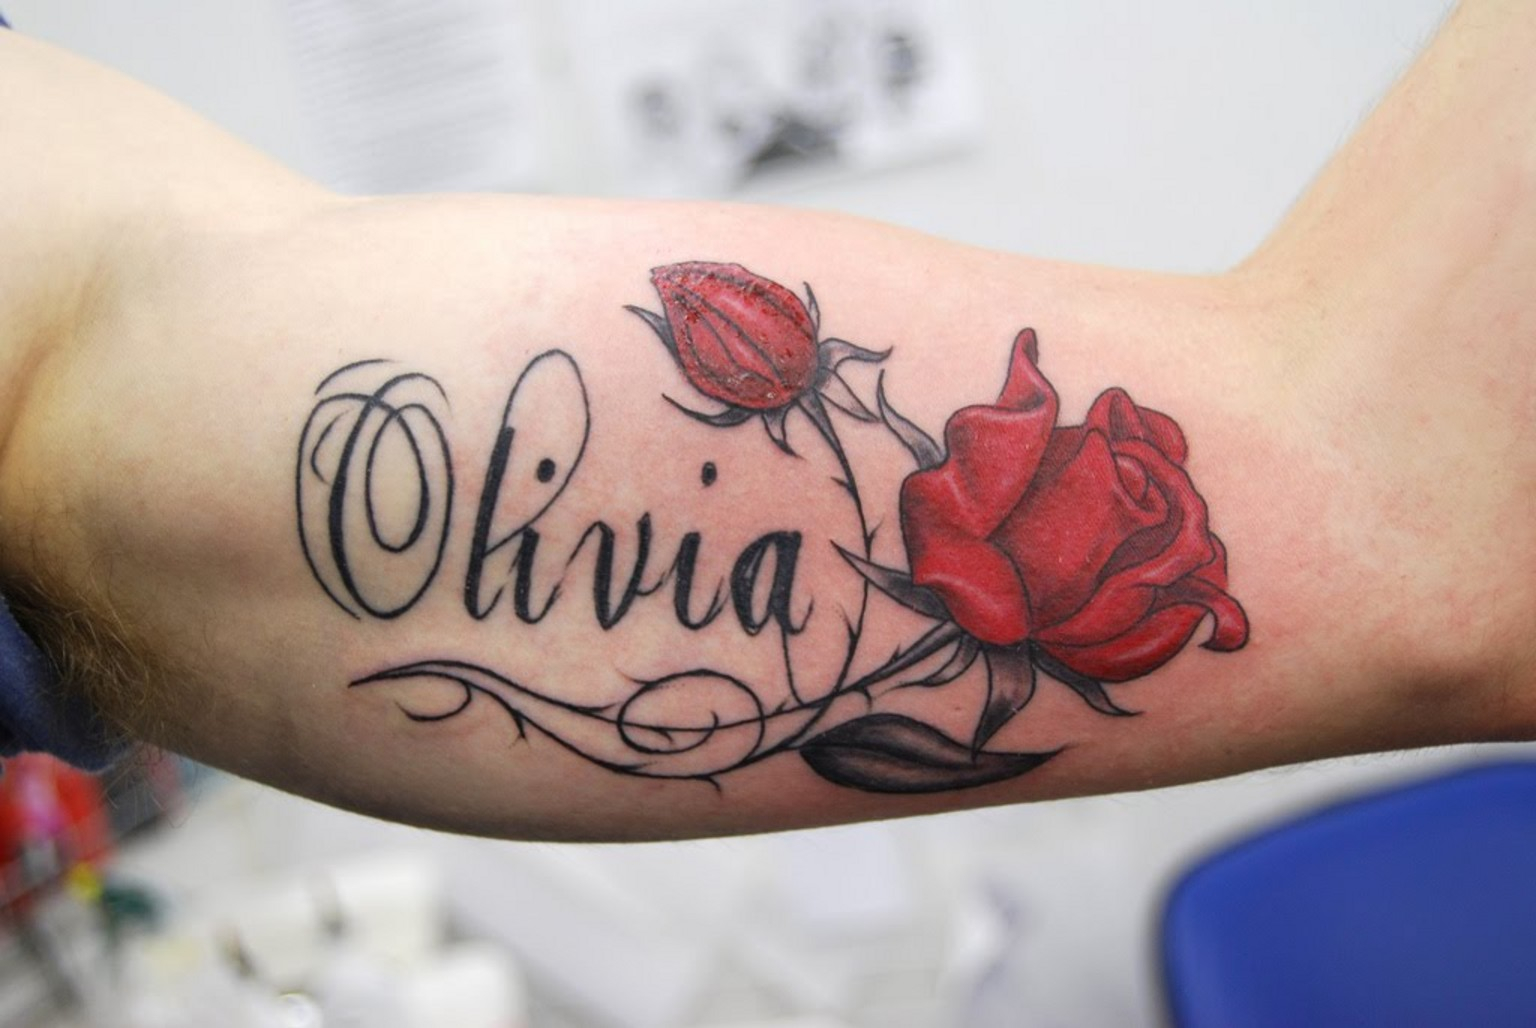 Tattoo Designs Name Tattoos pertaining to dimensions 1536 X 1028